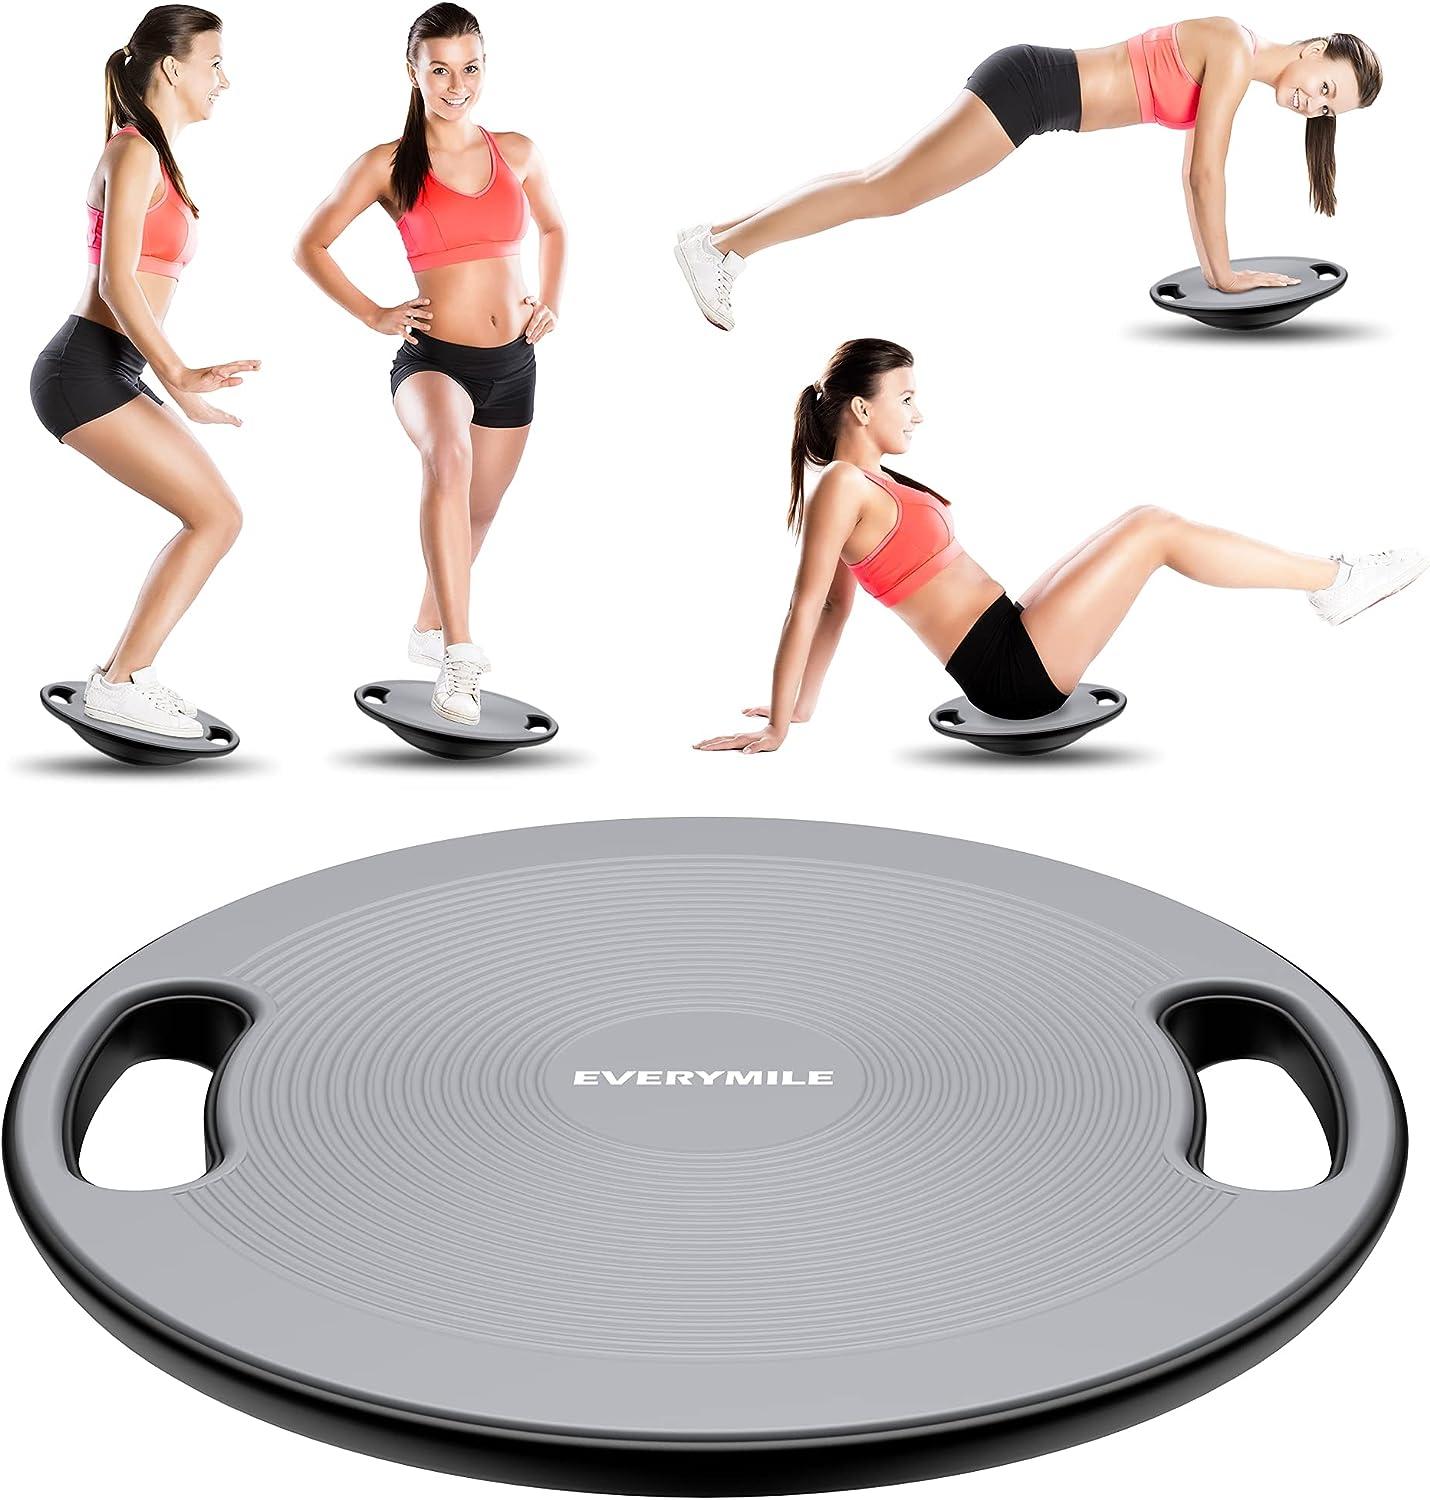 EVERYMILE Wobble Balance Board, Exercise Balance Stability Trainer Portable  Balance Board with Handle for Workout Core Trainer Physical Therapy & Gym